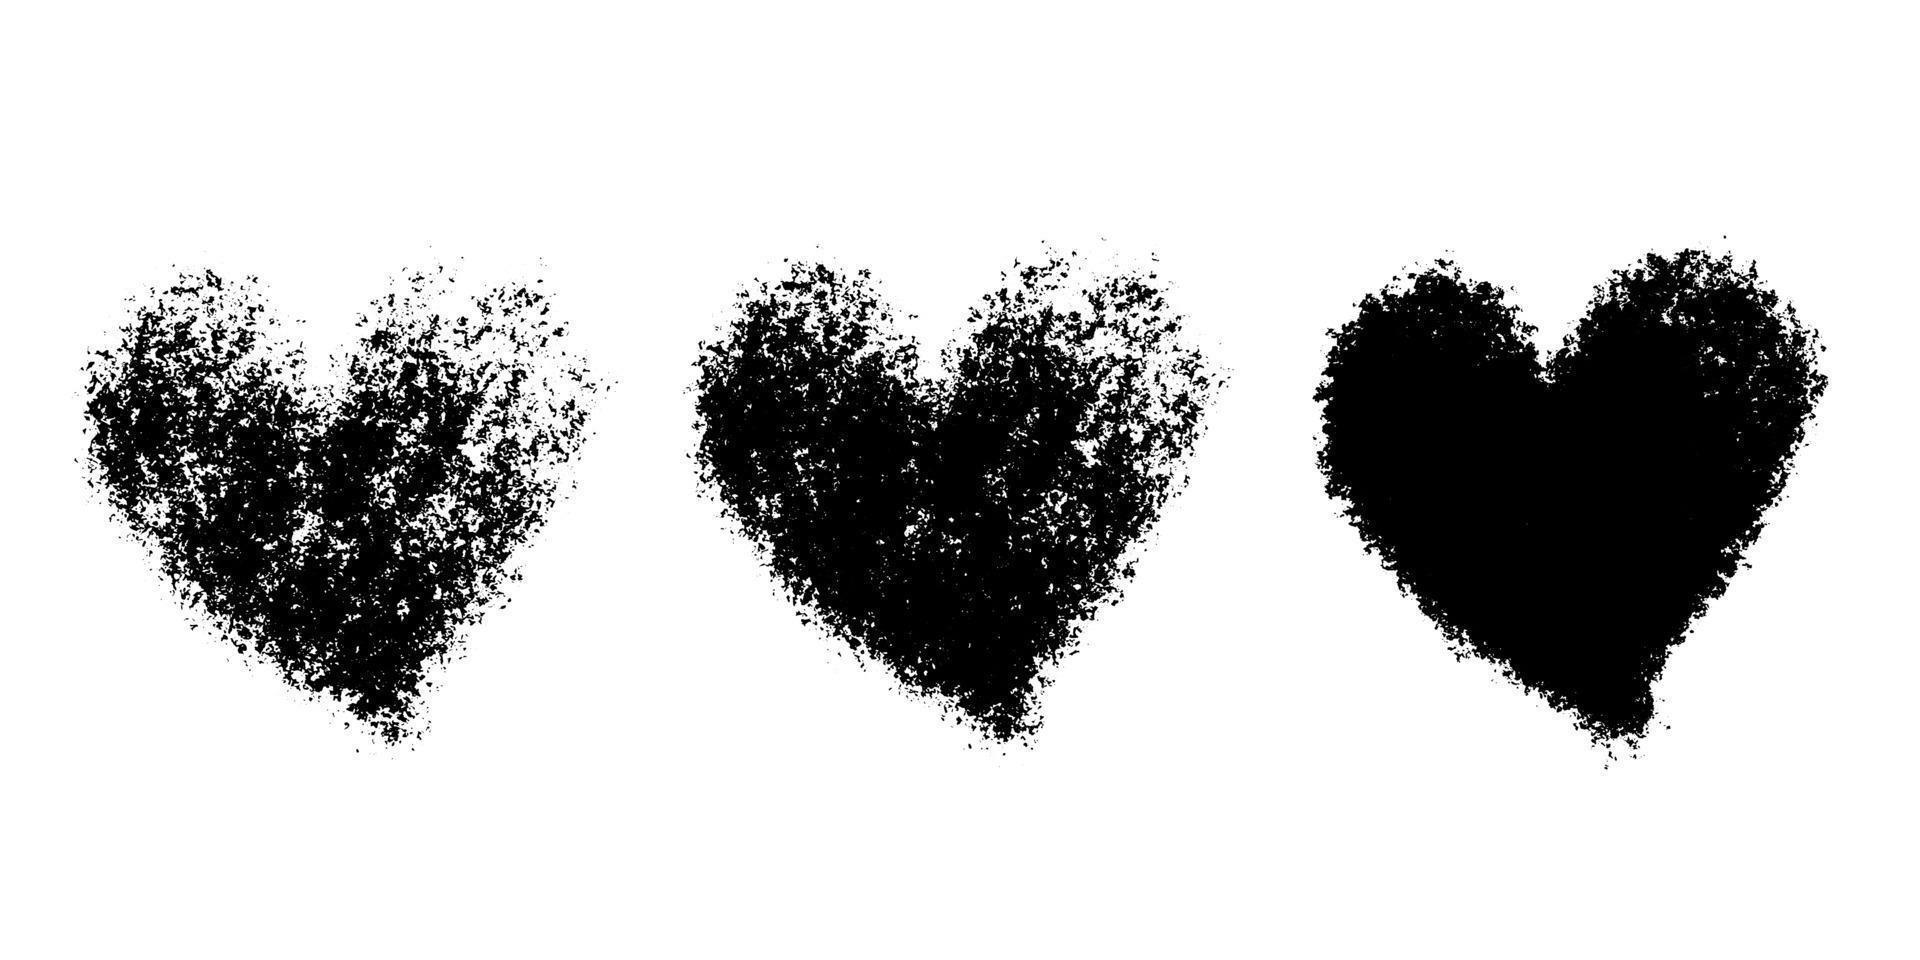 Grunge heart set. Various one color textured shapes. Vector hand drawn romantic backdrops.